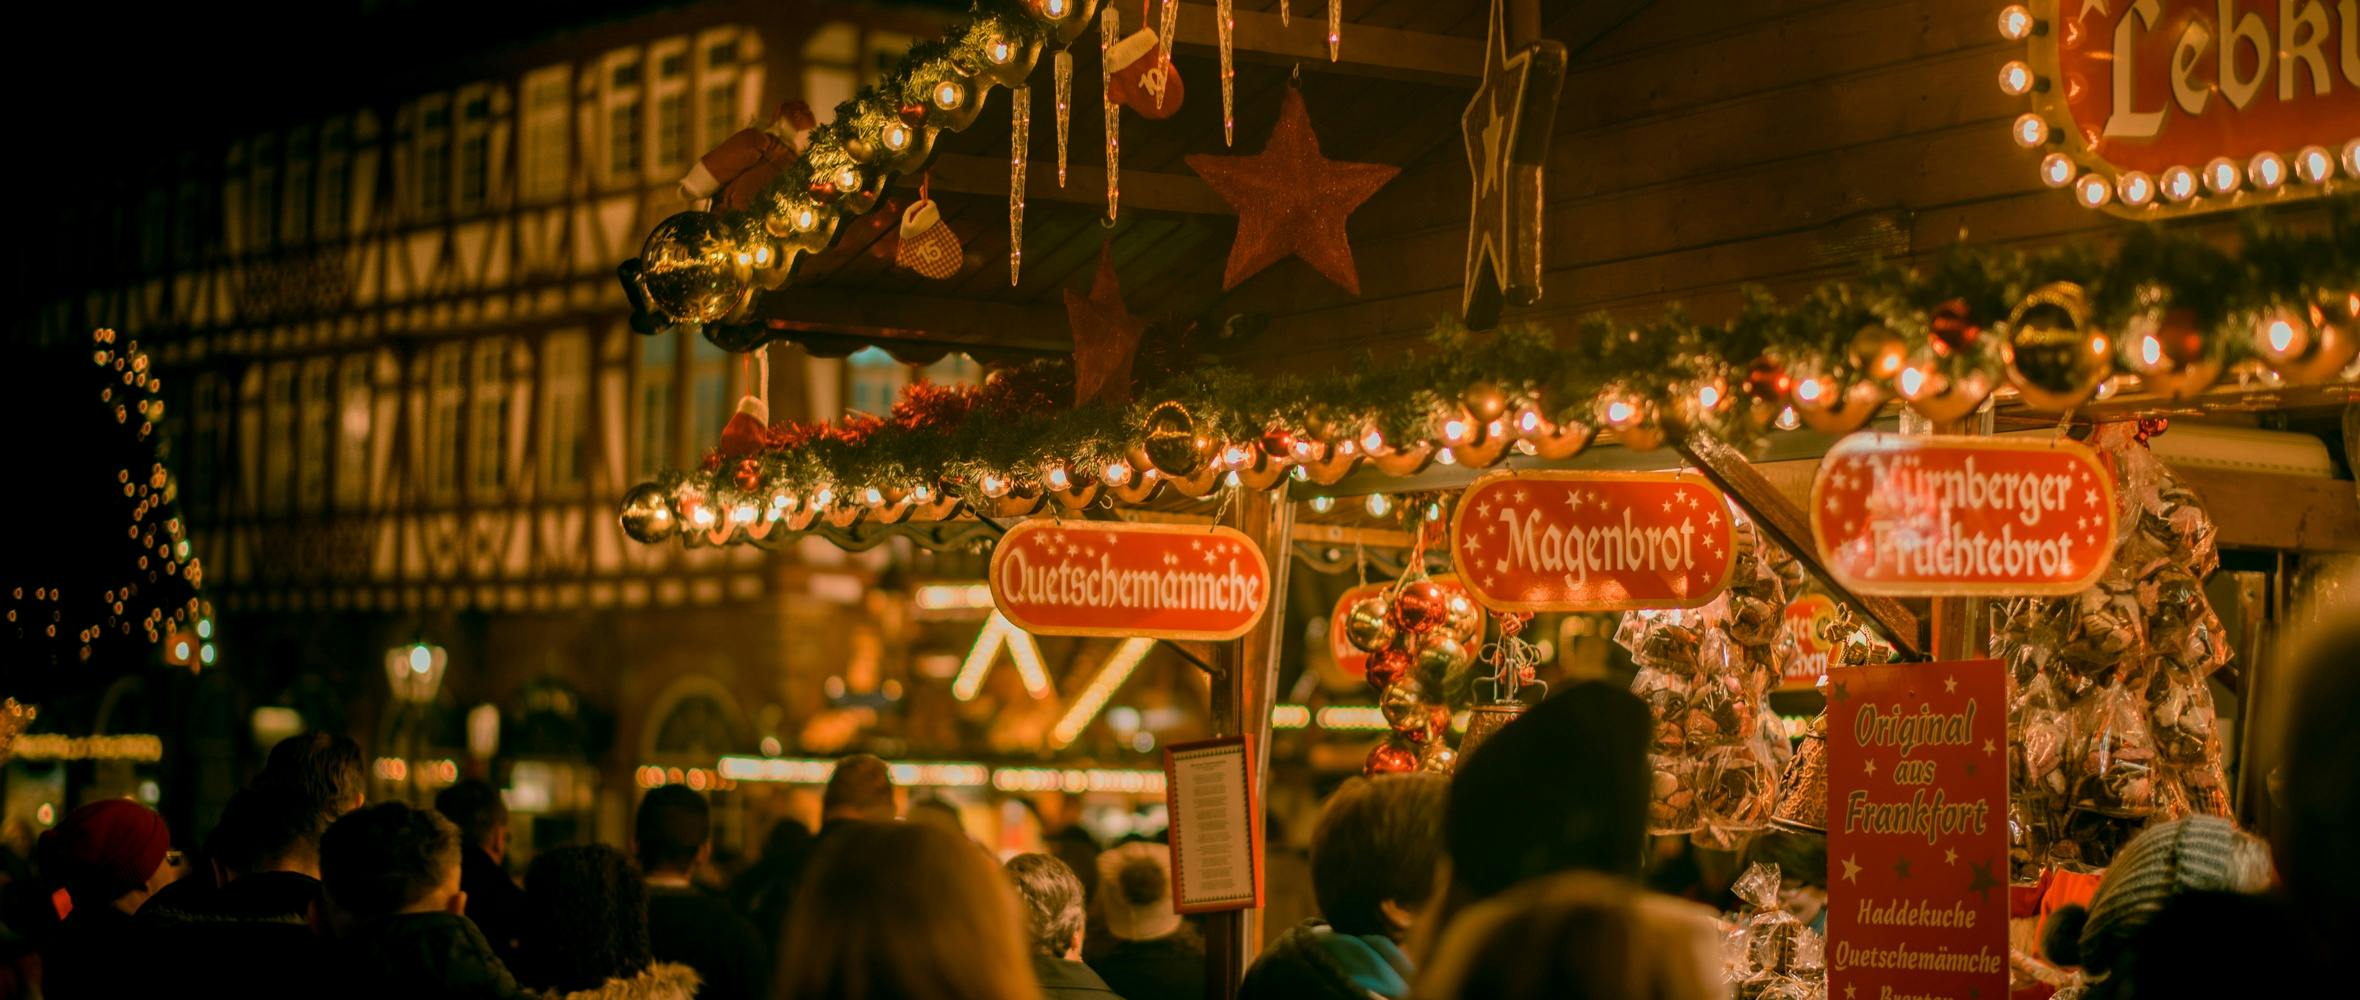 4 tips & activities for Christmas with your team feature image